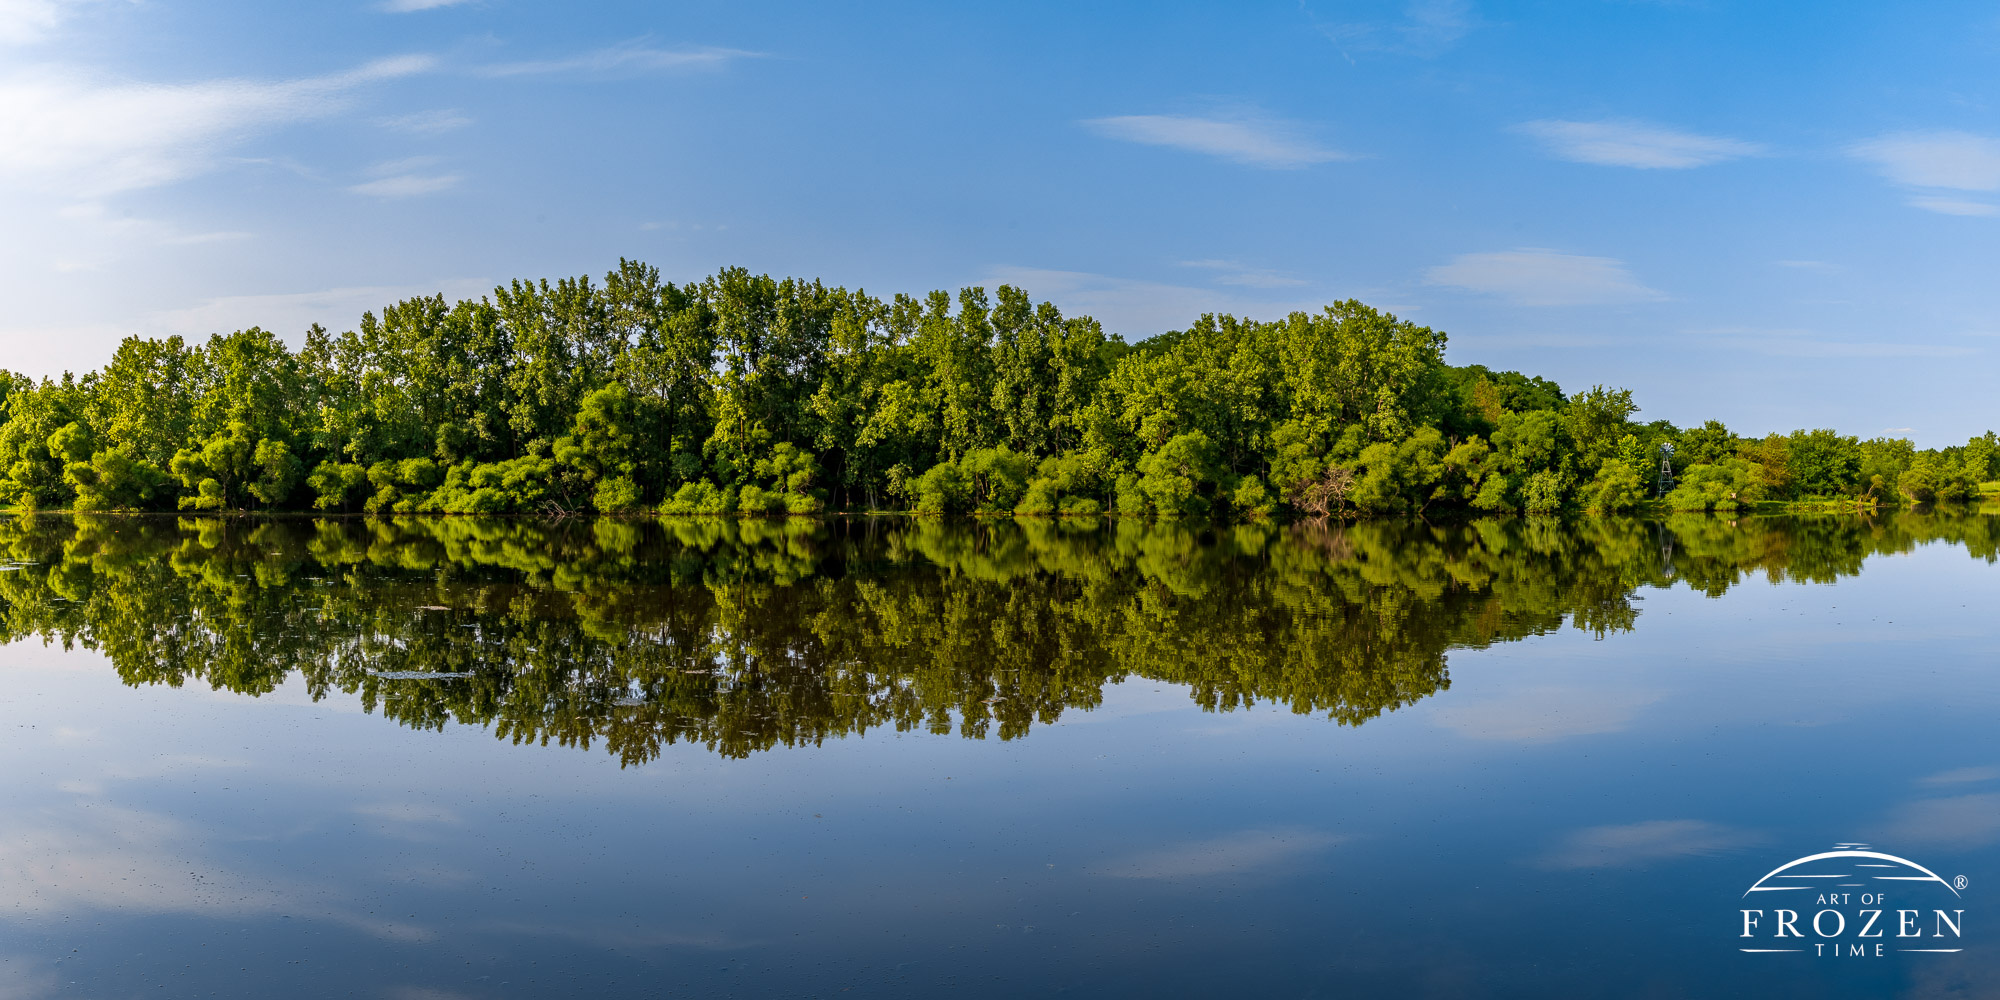 Carriage Hill MetroPark’s Cedar Lake perfectly reflects the distant shoreline on a still summer evening